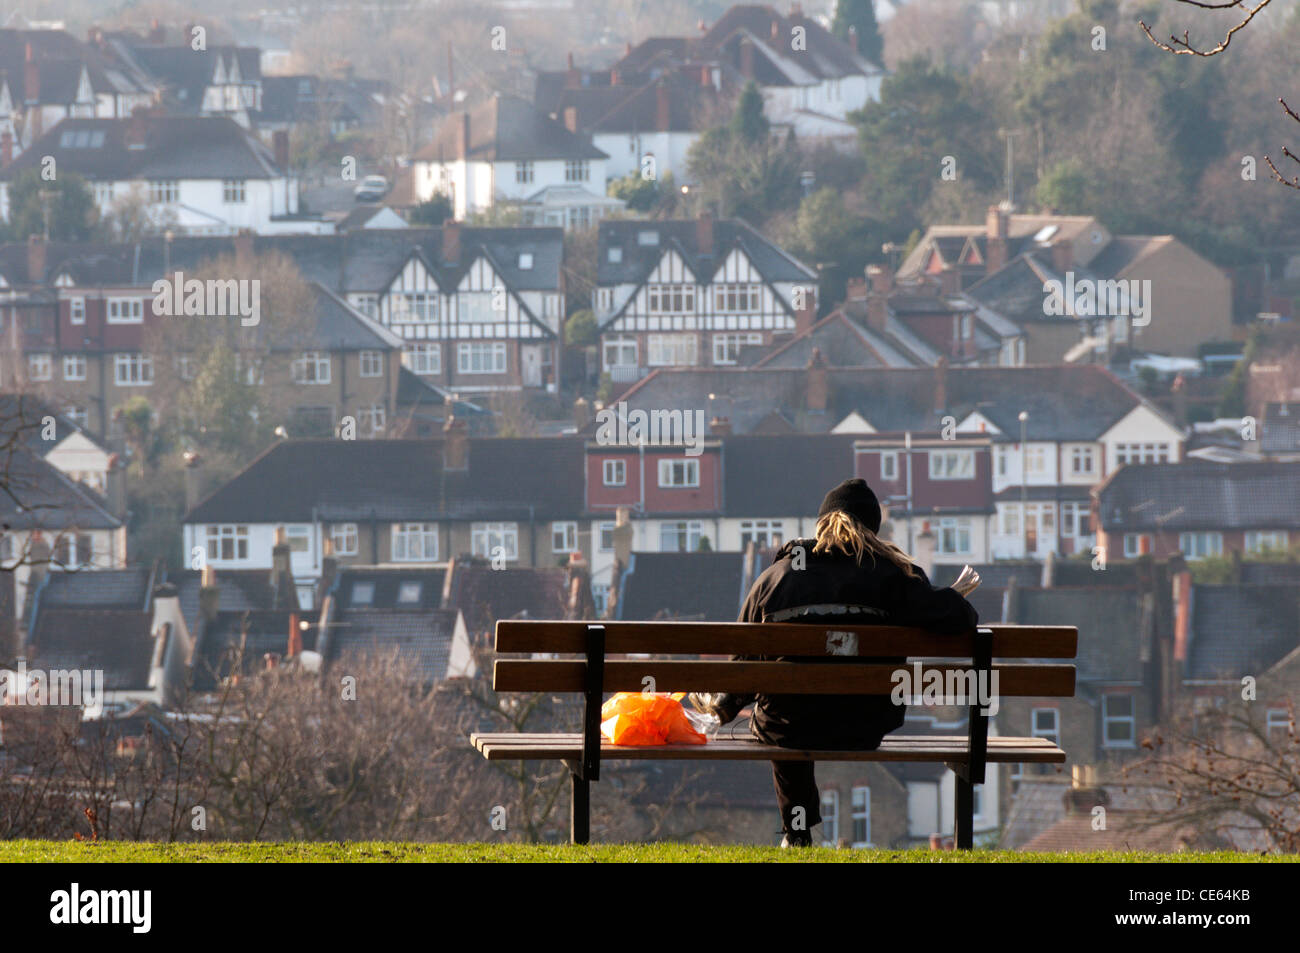 A person rests on a seat overlooking the South London suburb of Shortlands and reads a newspaper. Stock Photo